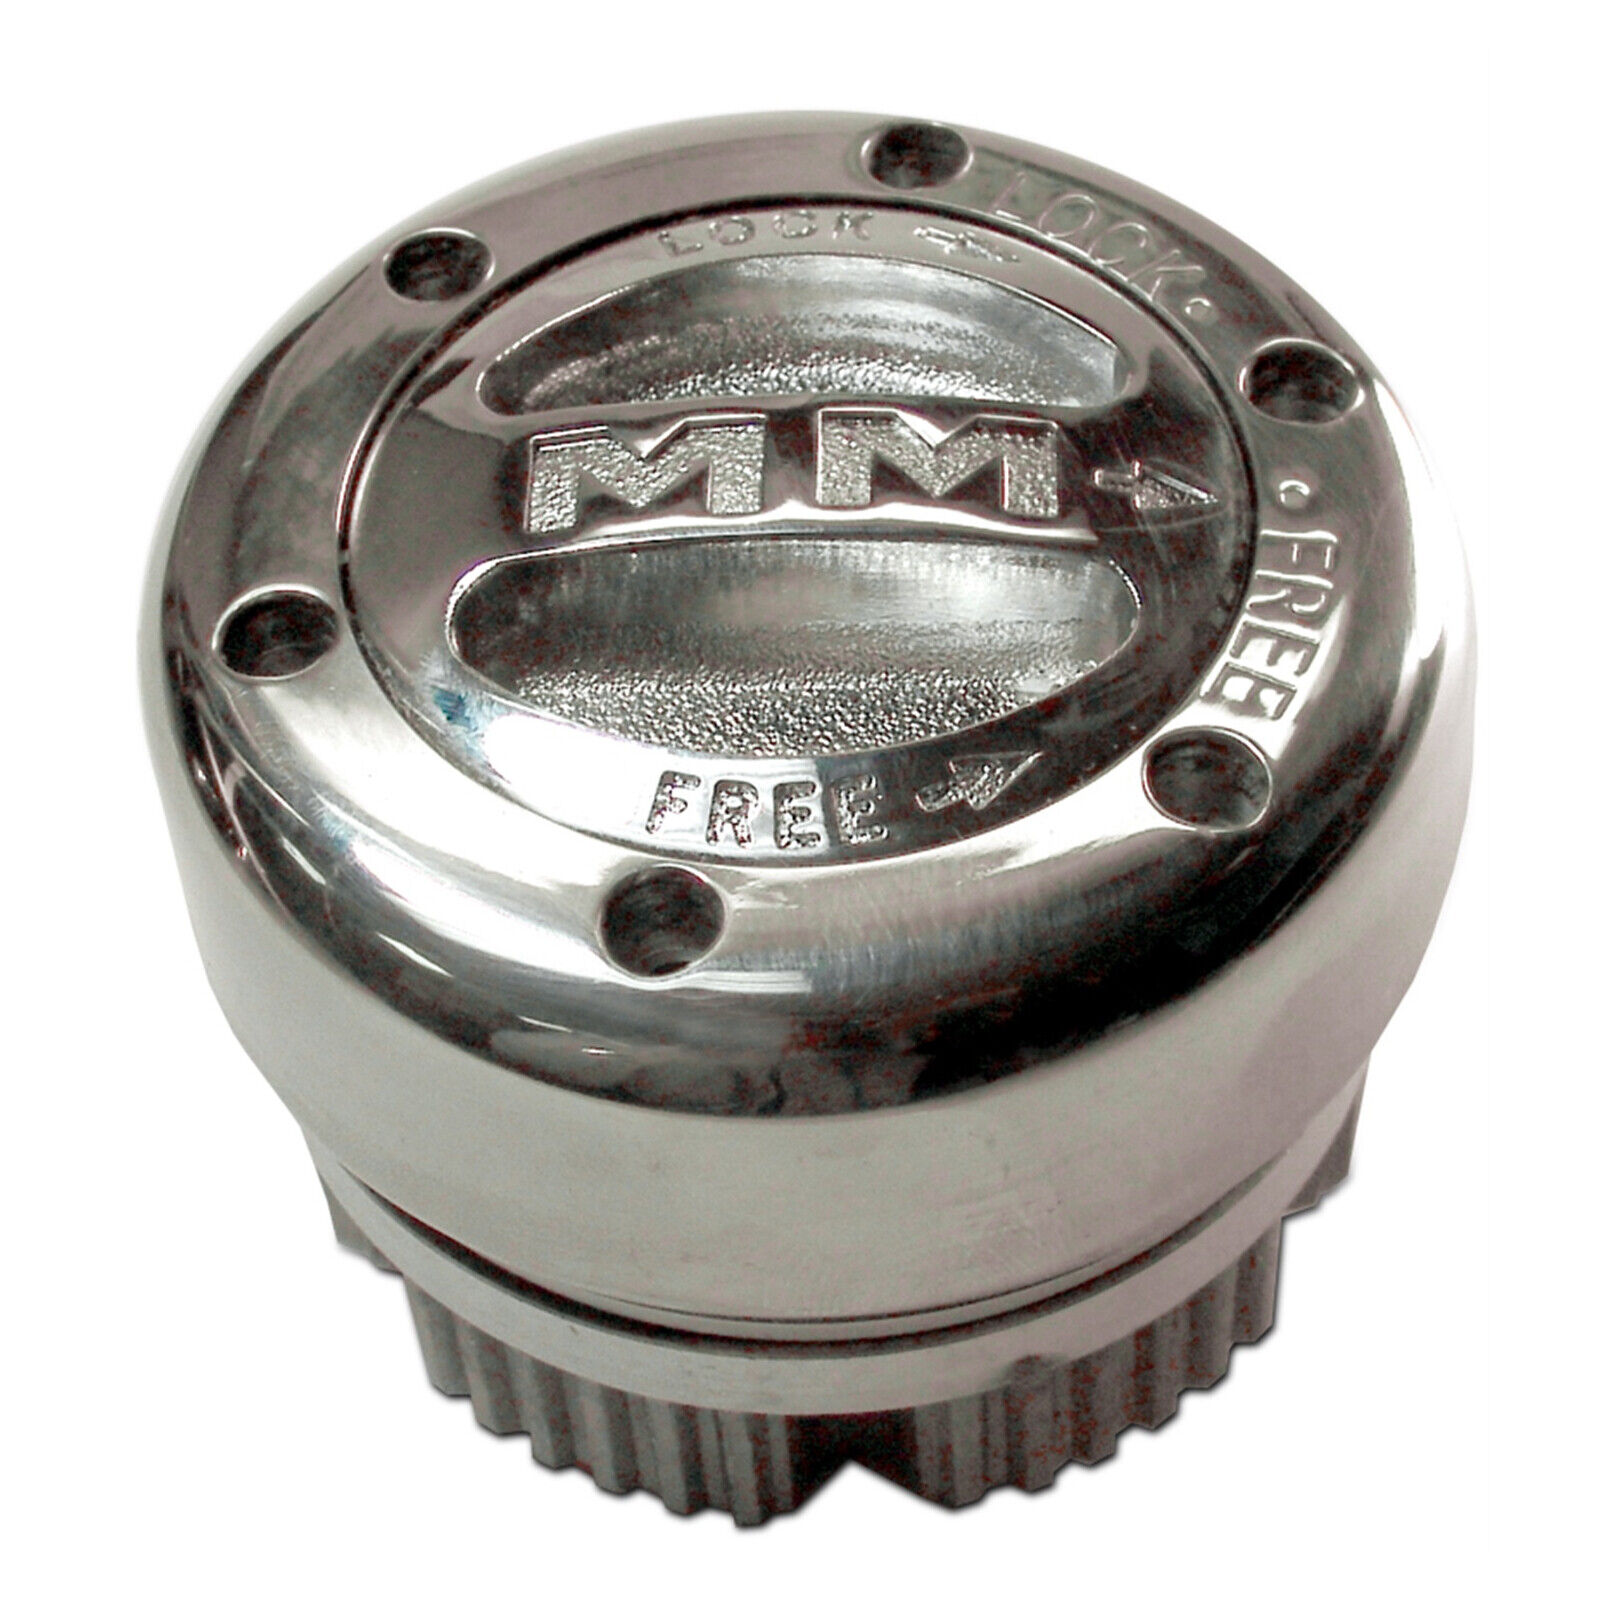 Mile Marker 104 Replacement Stainless Steel Lock Out Hubs: Pair for Dana 44